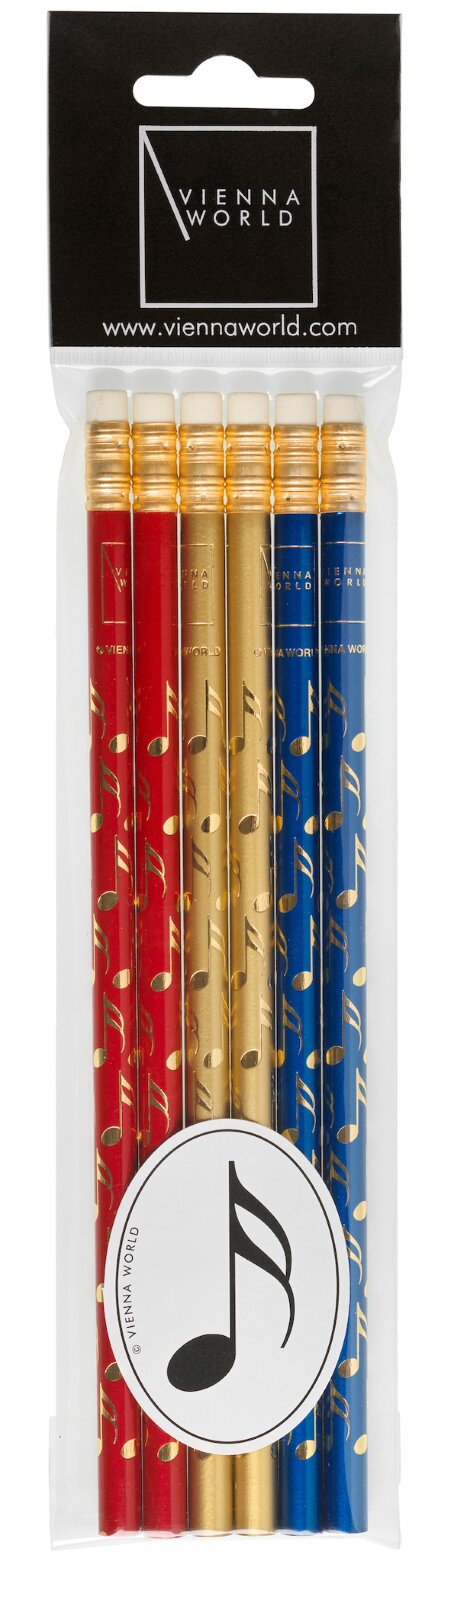 Vienna World Set 6 Pencil with eraserPencil Set - Notes (Colored 6 Pack) red / gold / blue (6 pieces per package) Schreibmaterial Z 727 : photo 1